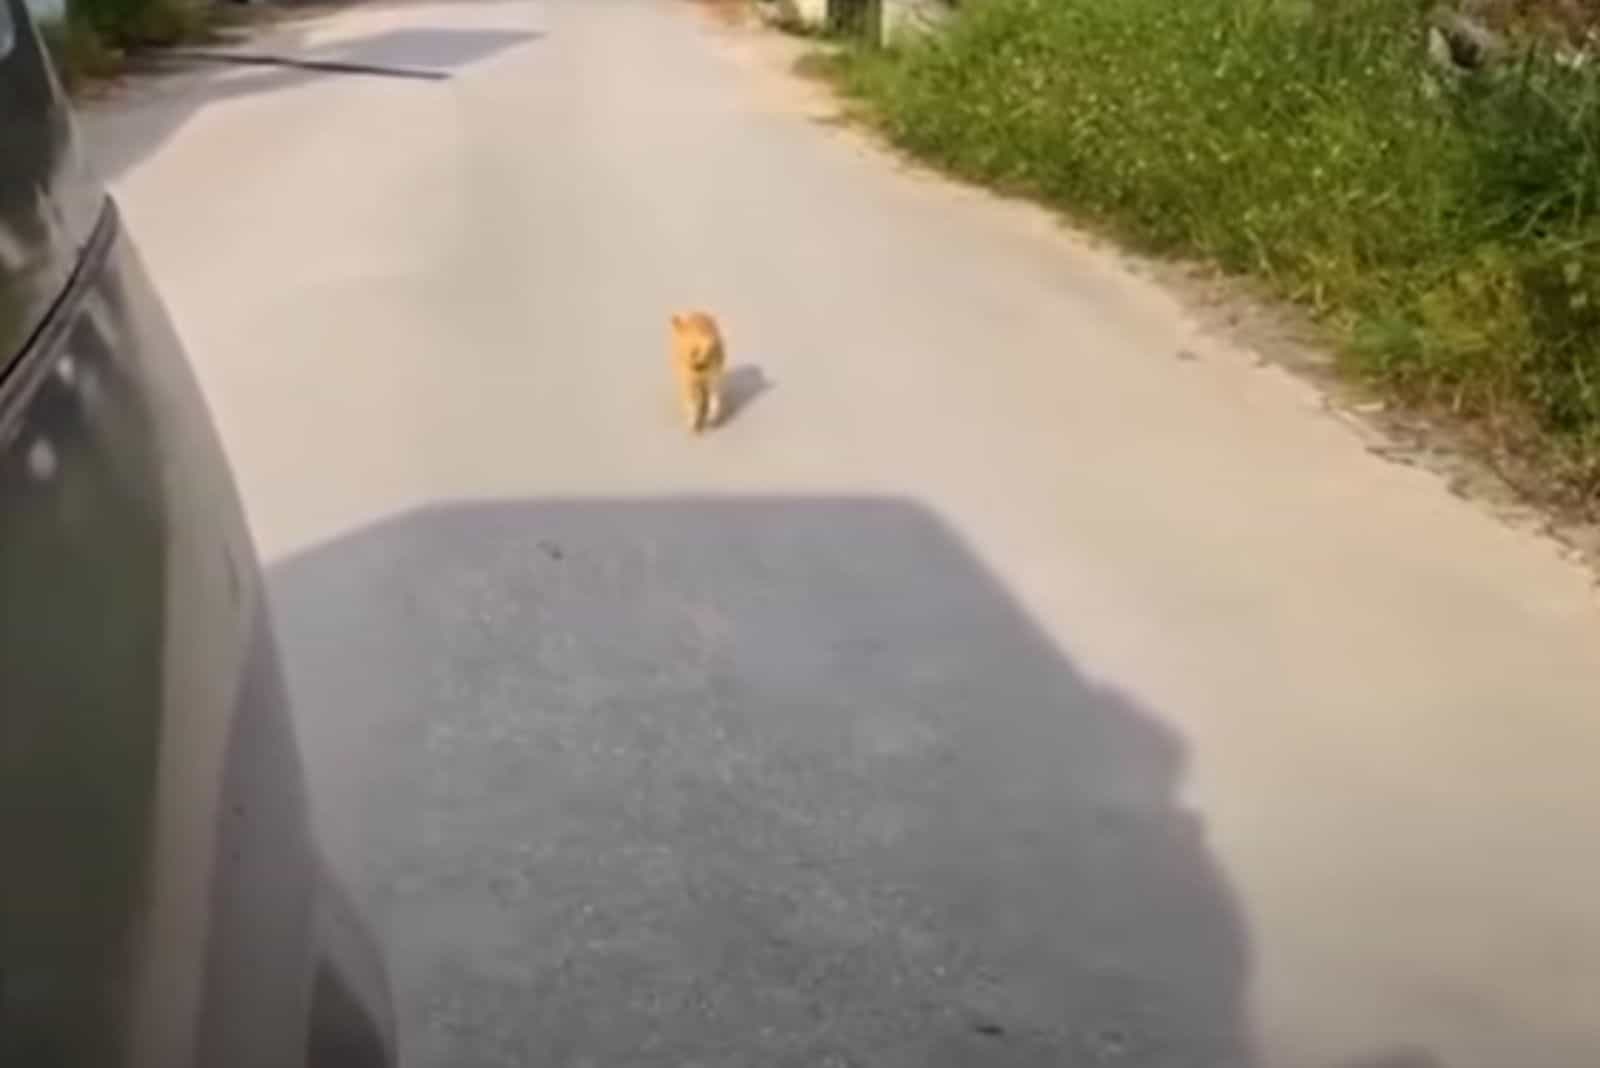 the yellow cat is walking down the street following the car